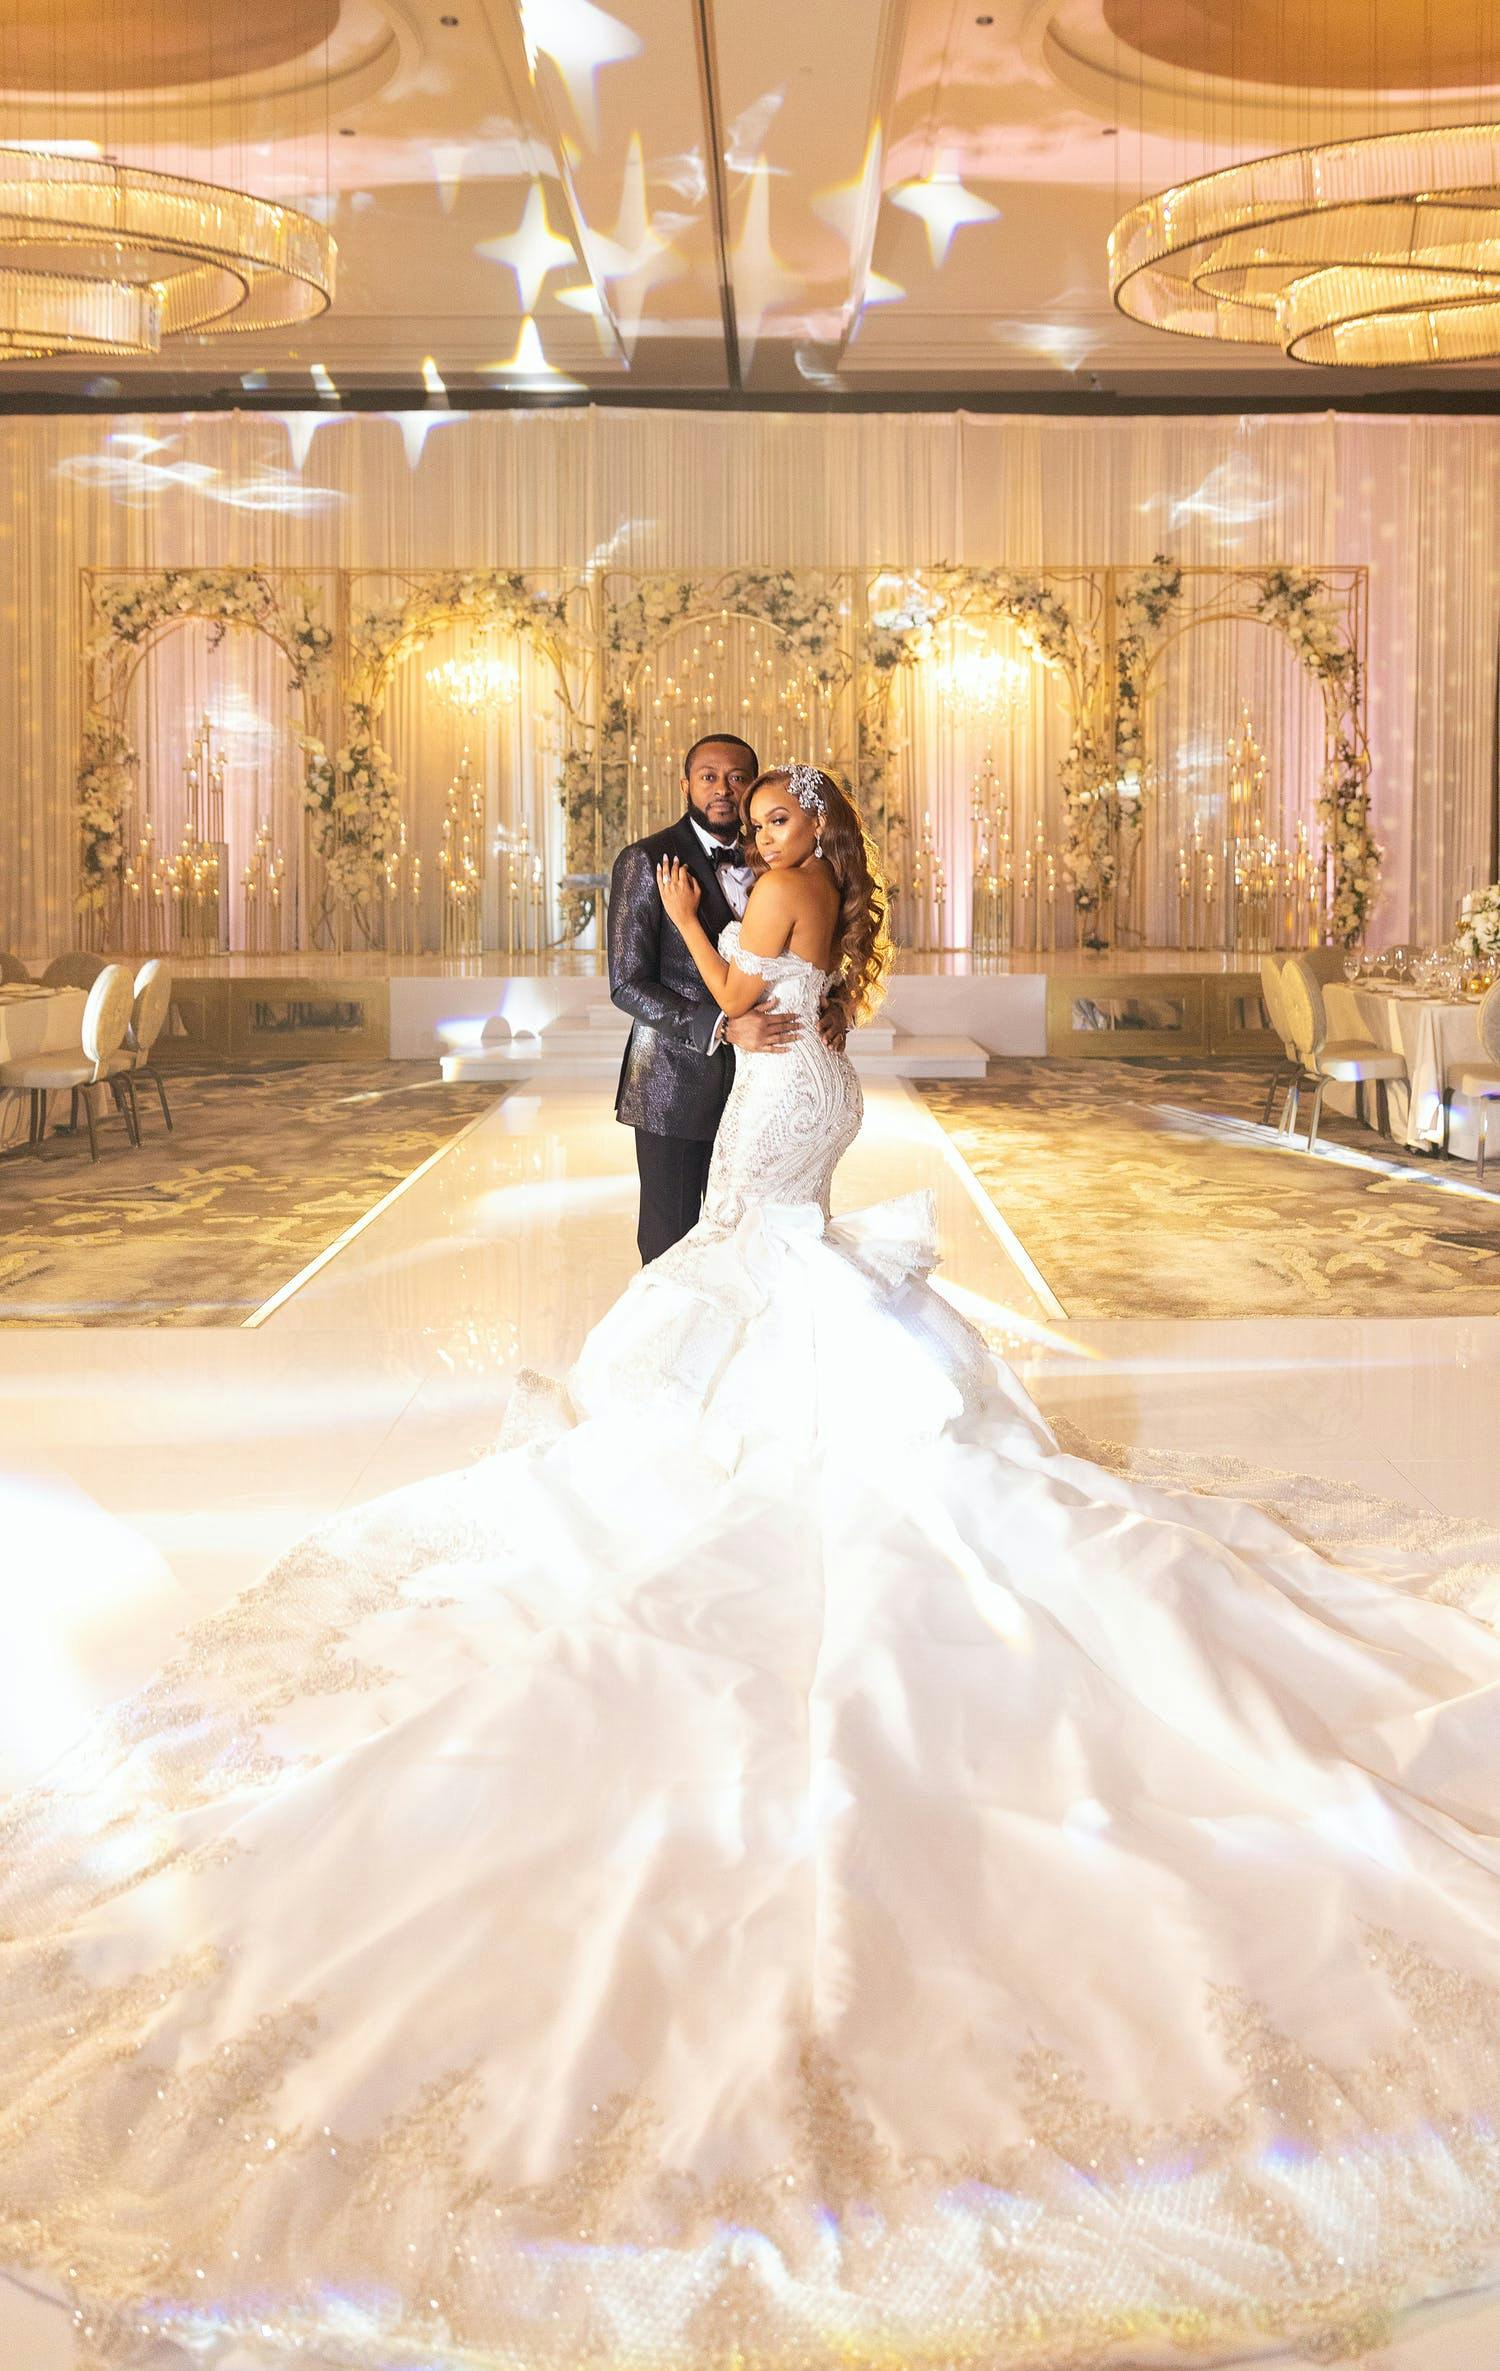 Bride and Groom Embrace at Golden Ballroom Wedding | PartySlate